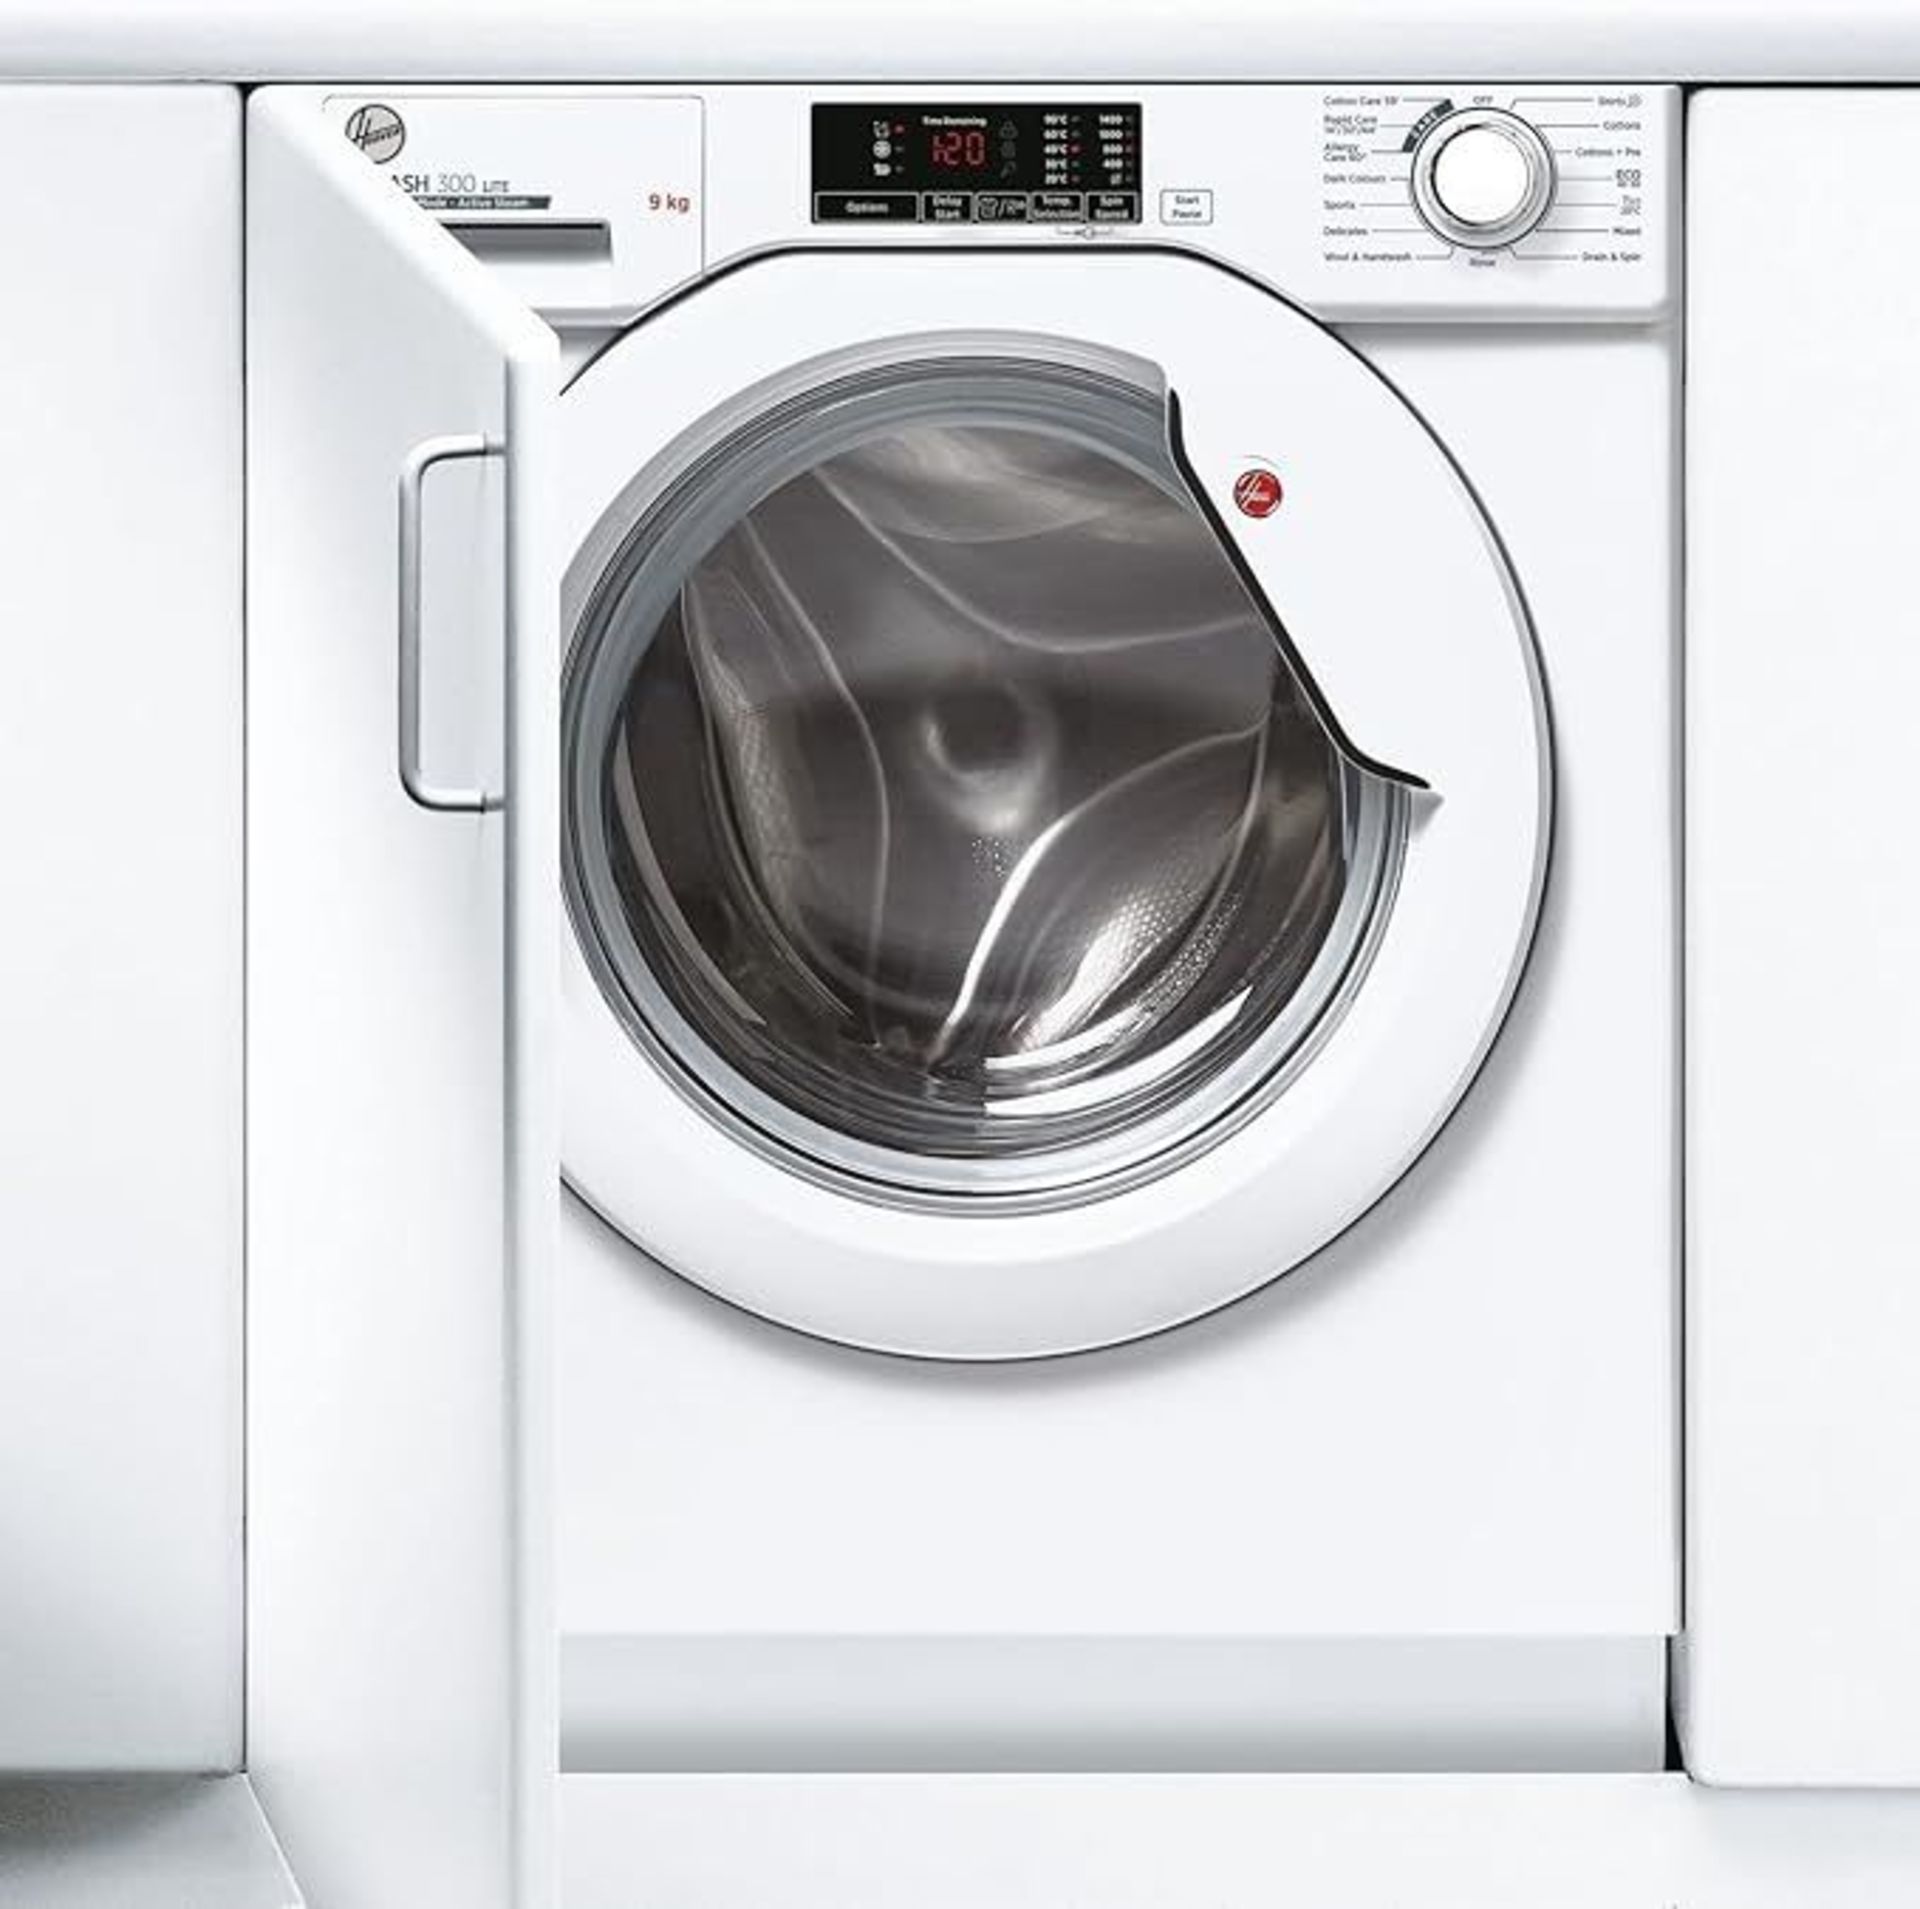 Hoover H-Wash 300 HBWS49D1E Integrated Washing Machine, 9KG, 1400RPM, White. - H/S. RRP £569.99. - Image 2 of 3